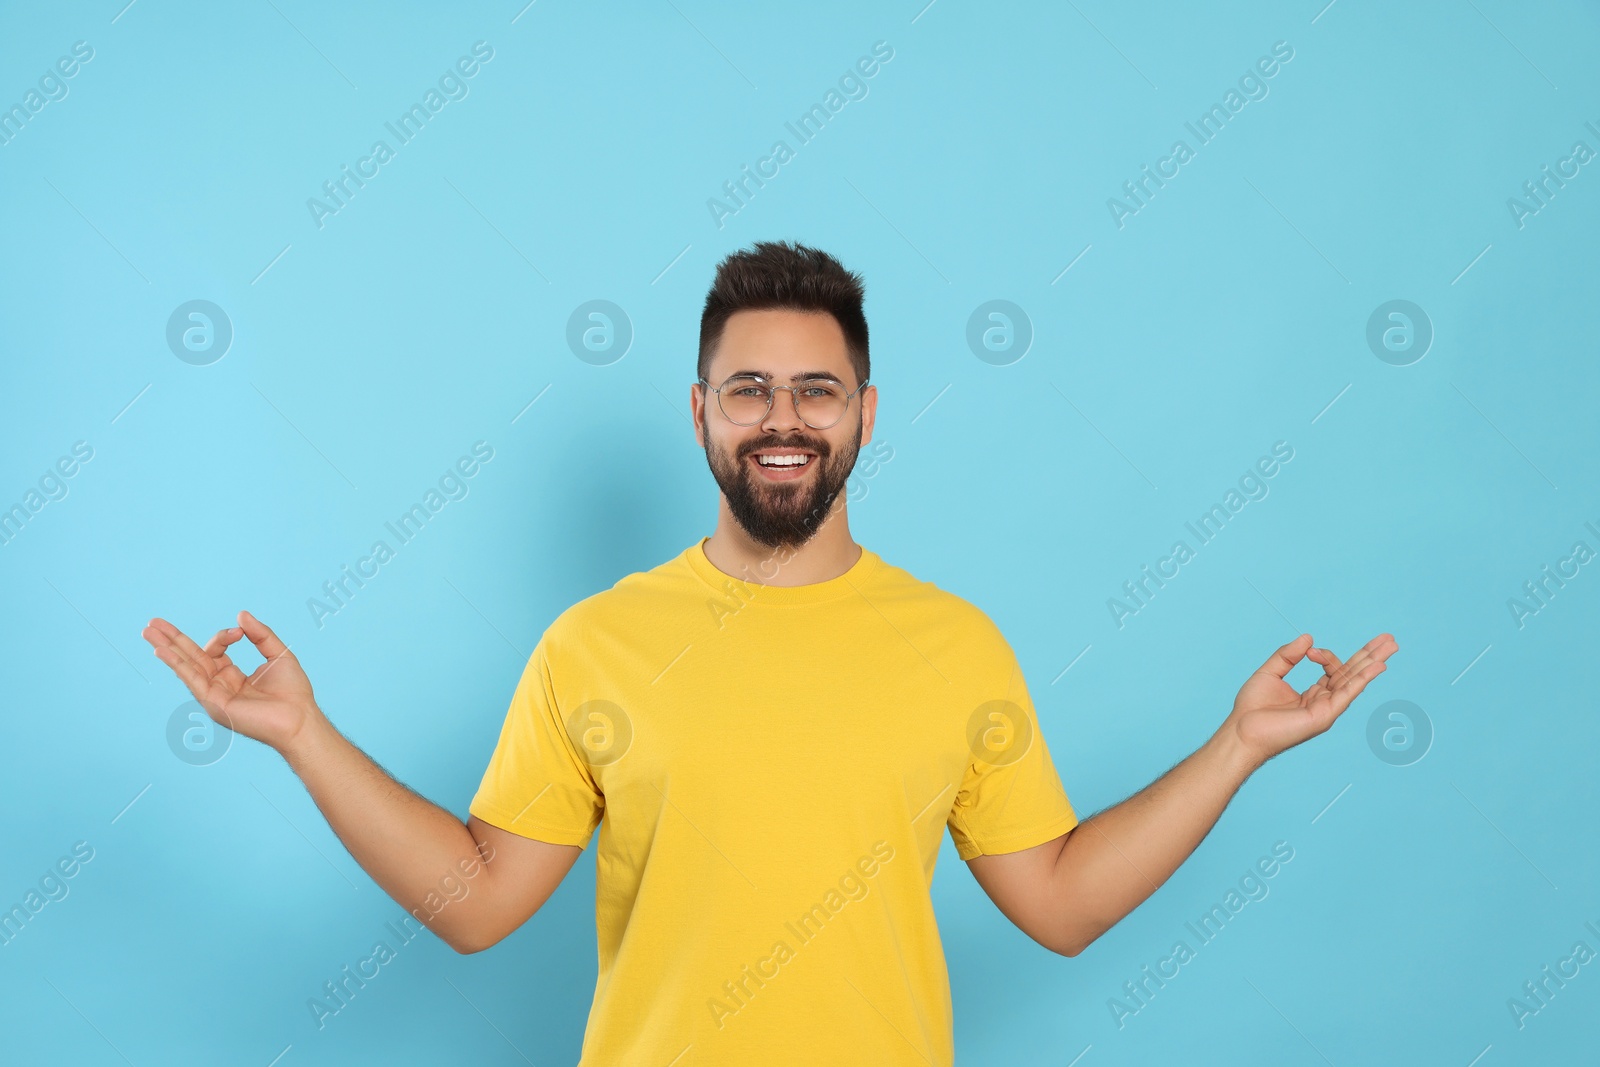 Photo of Young man meditating on light blue background. Zen concept